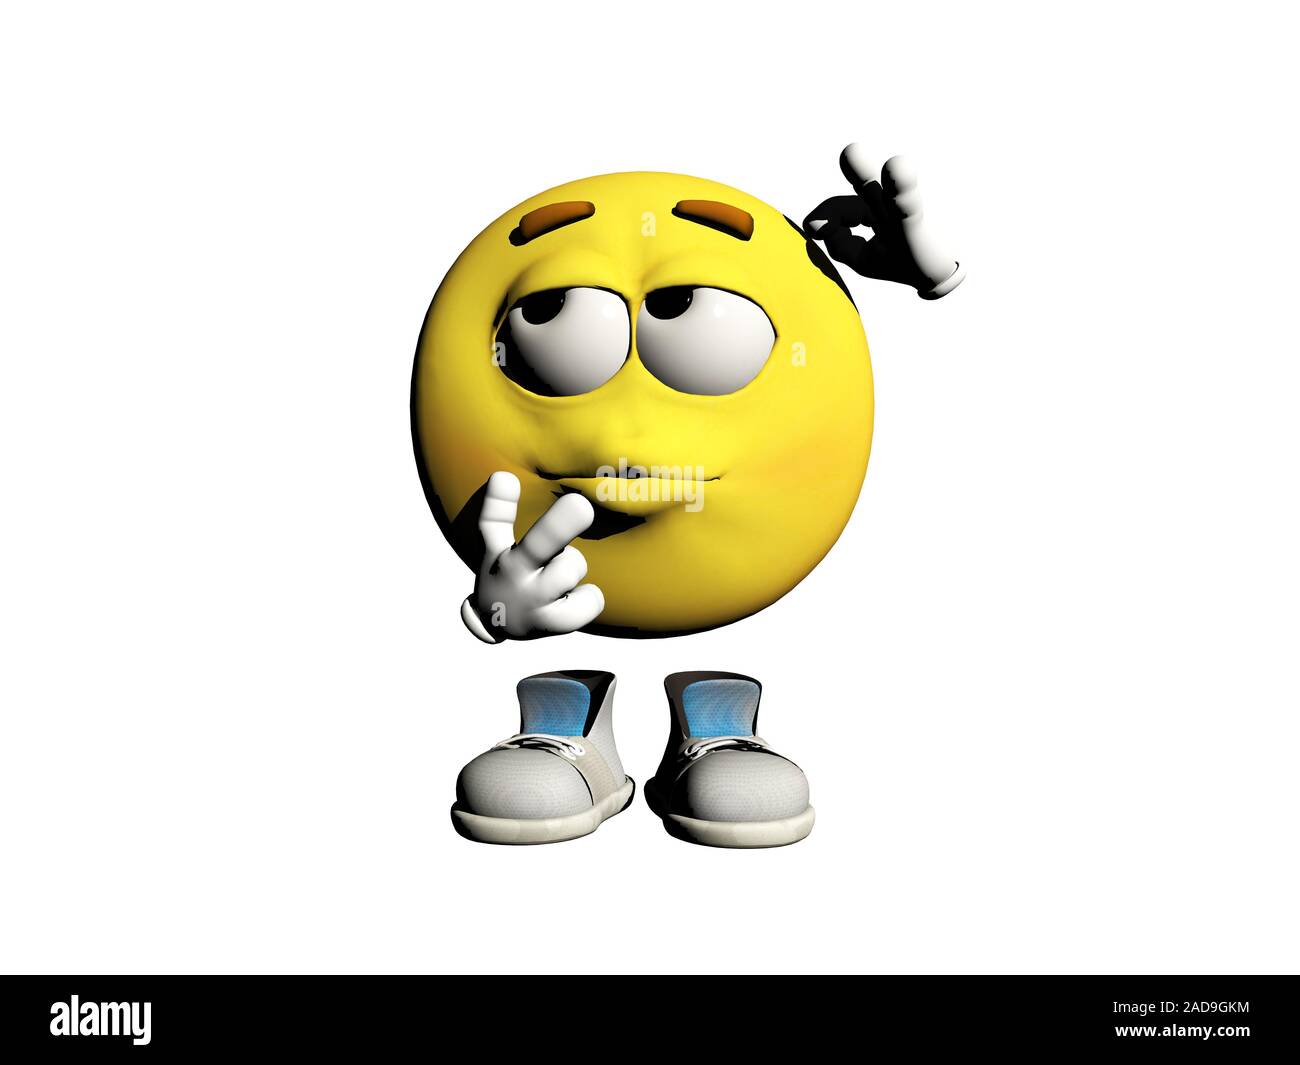 yellow smiley face with thoughtful emotions Stock Photo